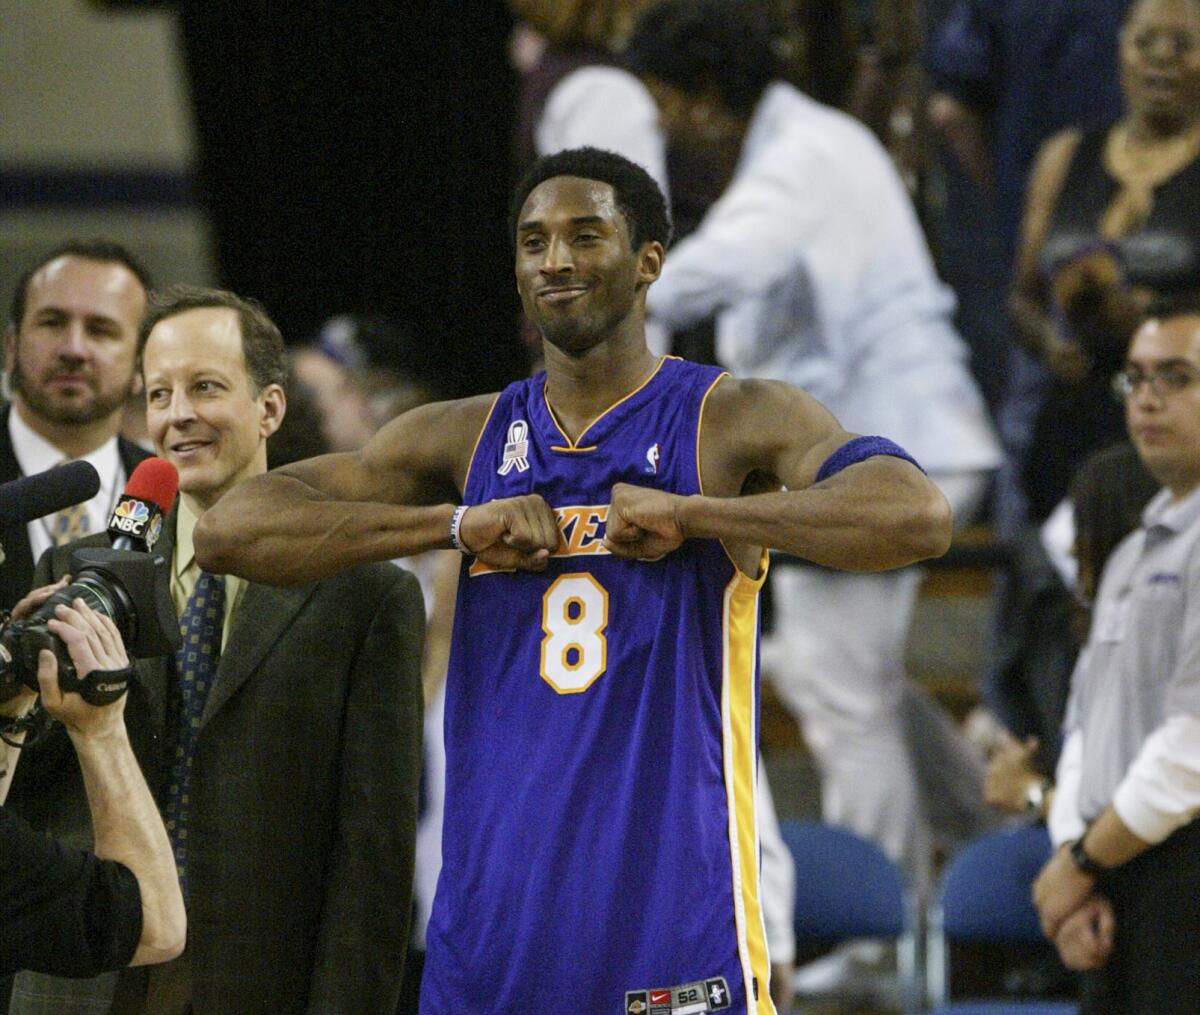 Kobe Bryant interacts with fans before a TV interview with Jim Gray.